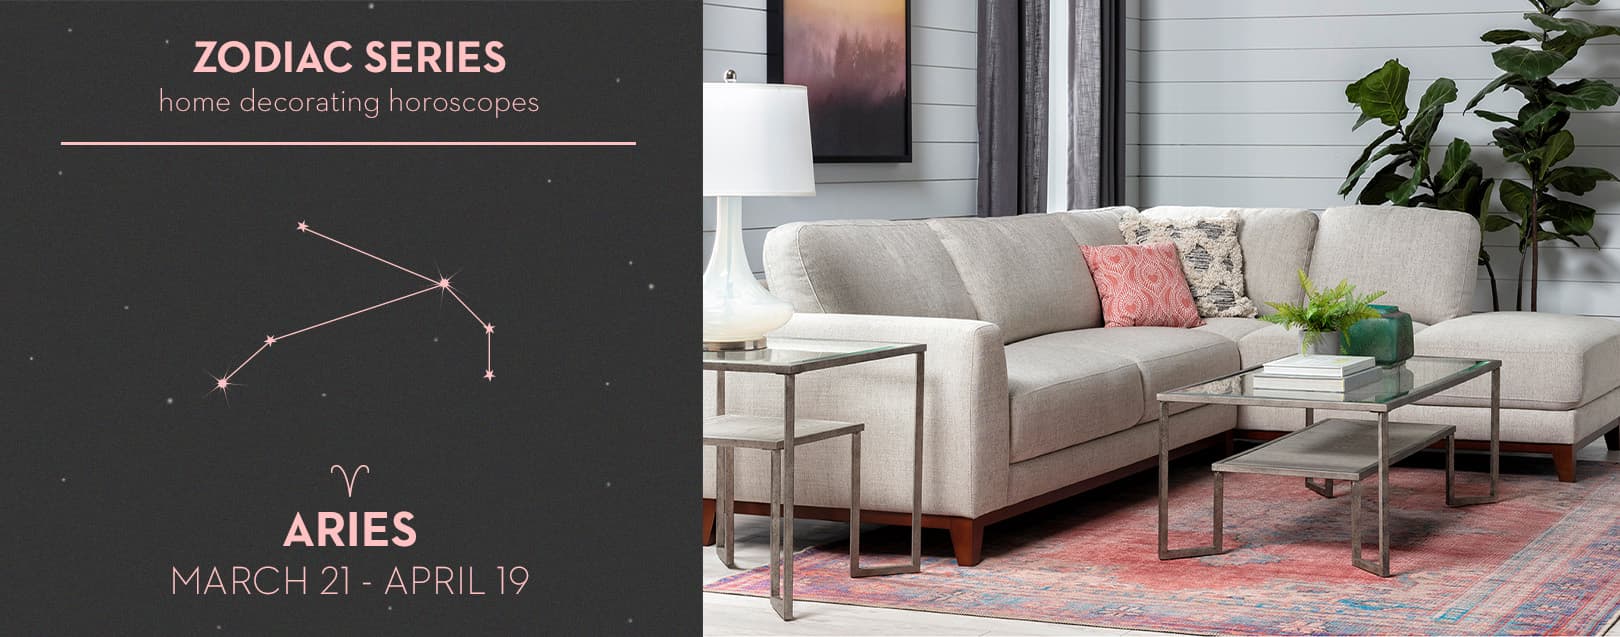 aries home decor featured